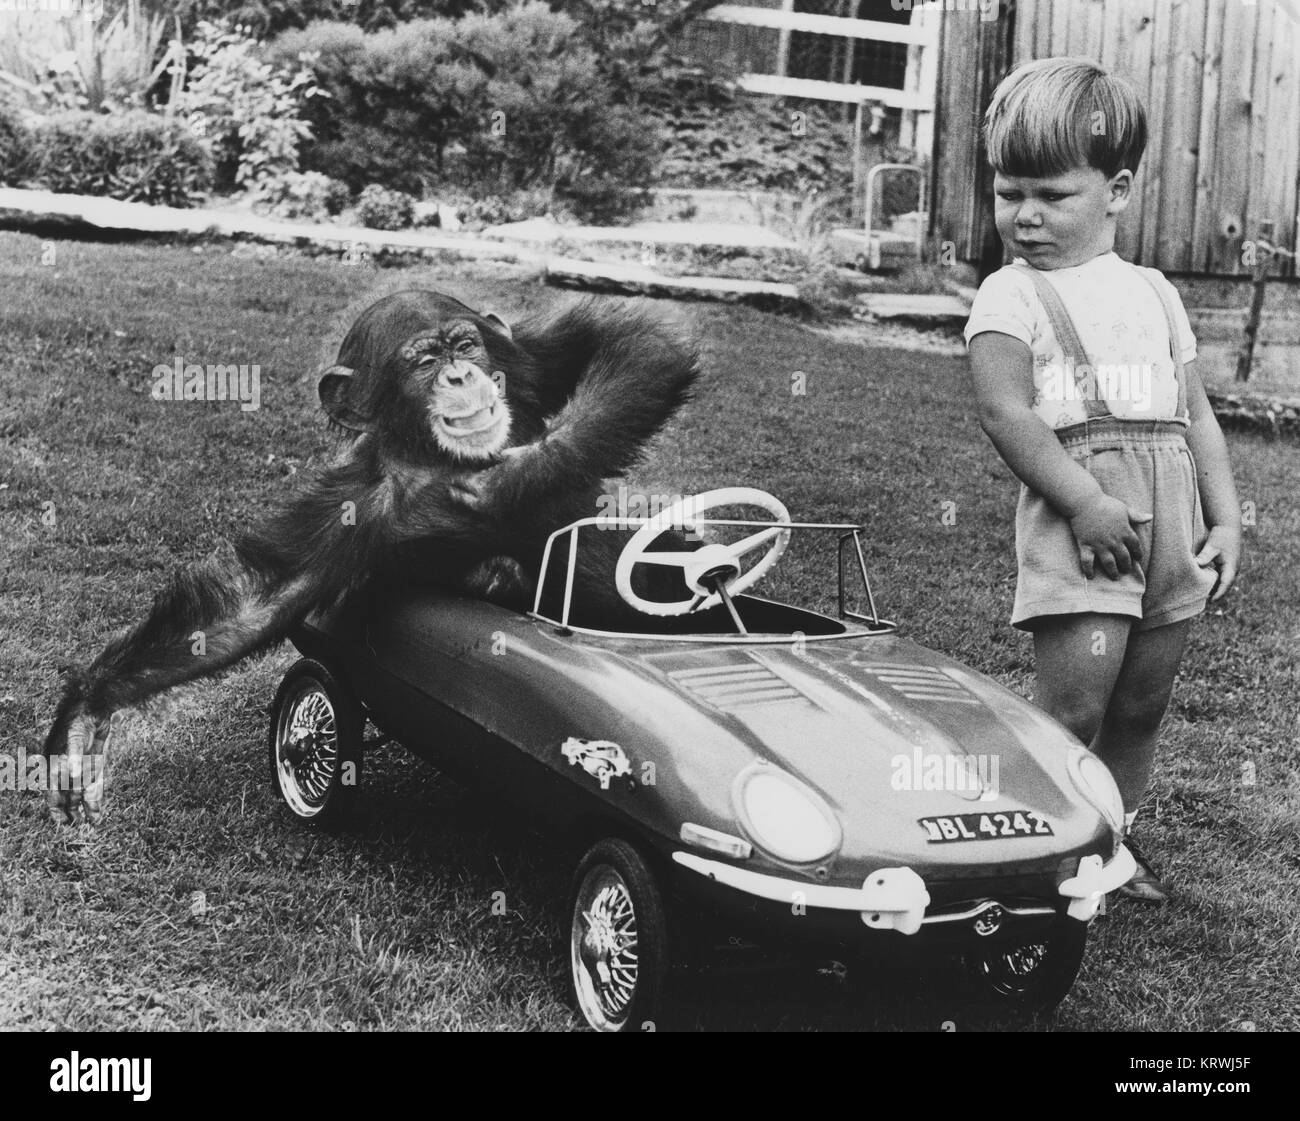 Chimpanzee in toy car, England, Great Britain Stock Photo